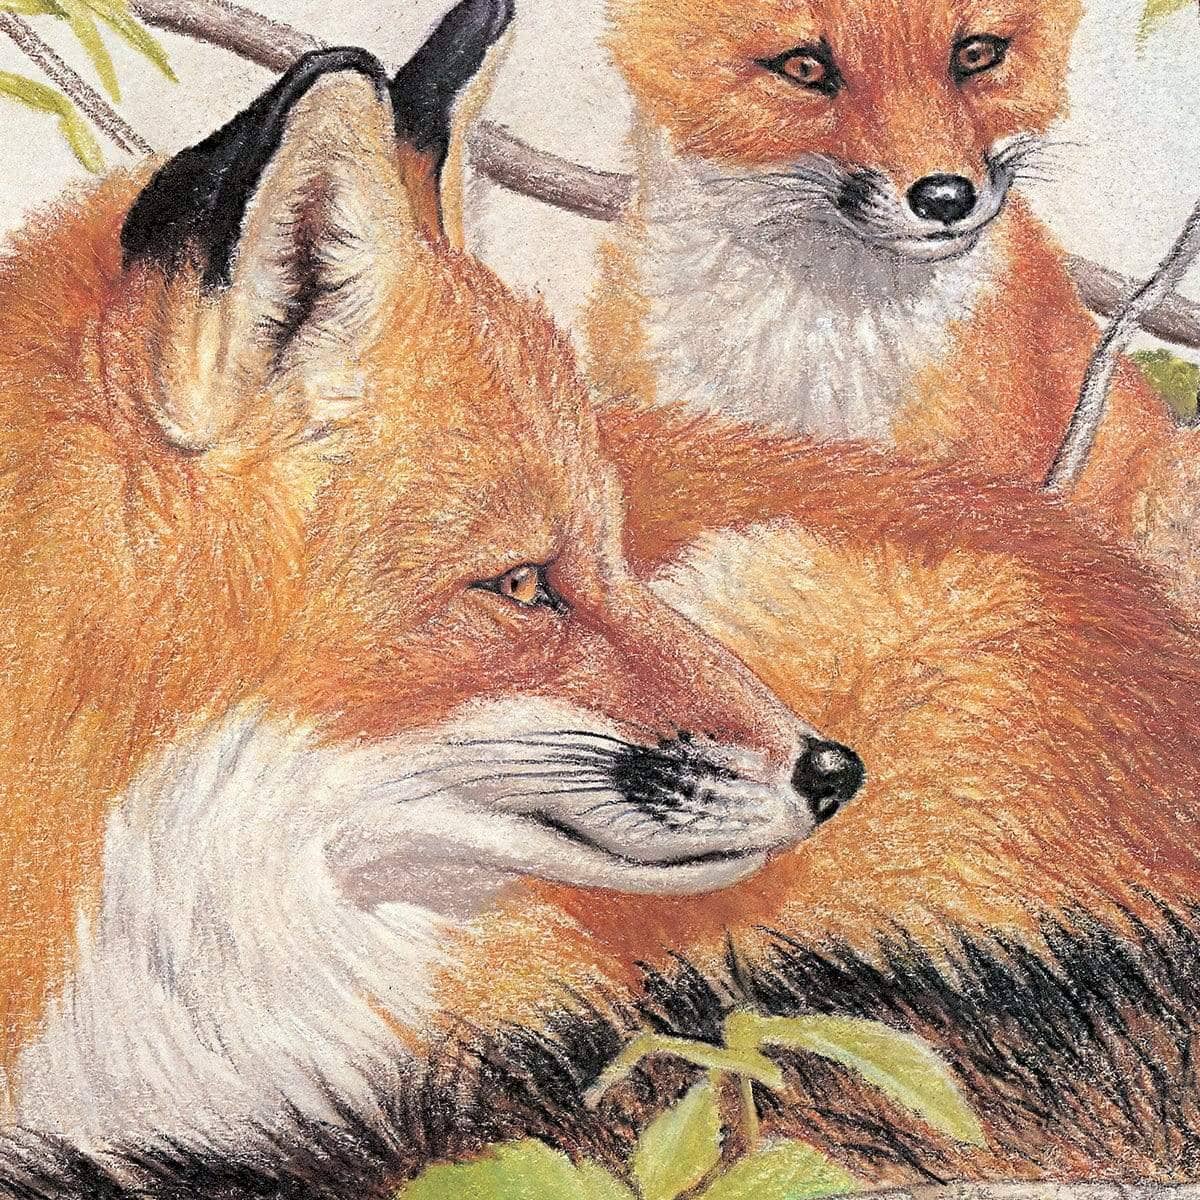 Red Fox and Kits - Framed Print | Artwork by Glen Loates